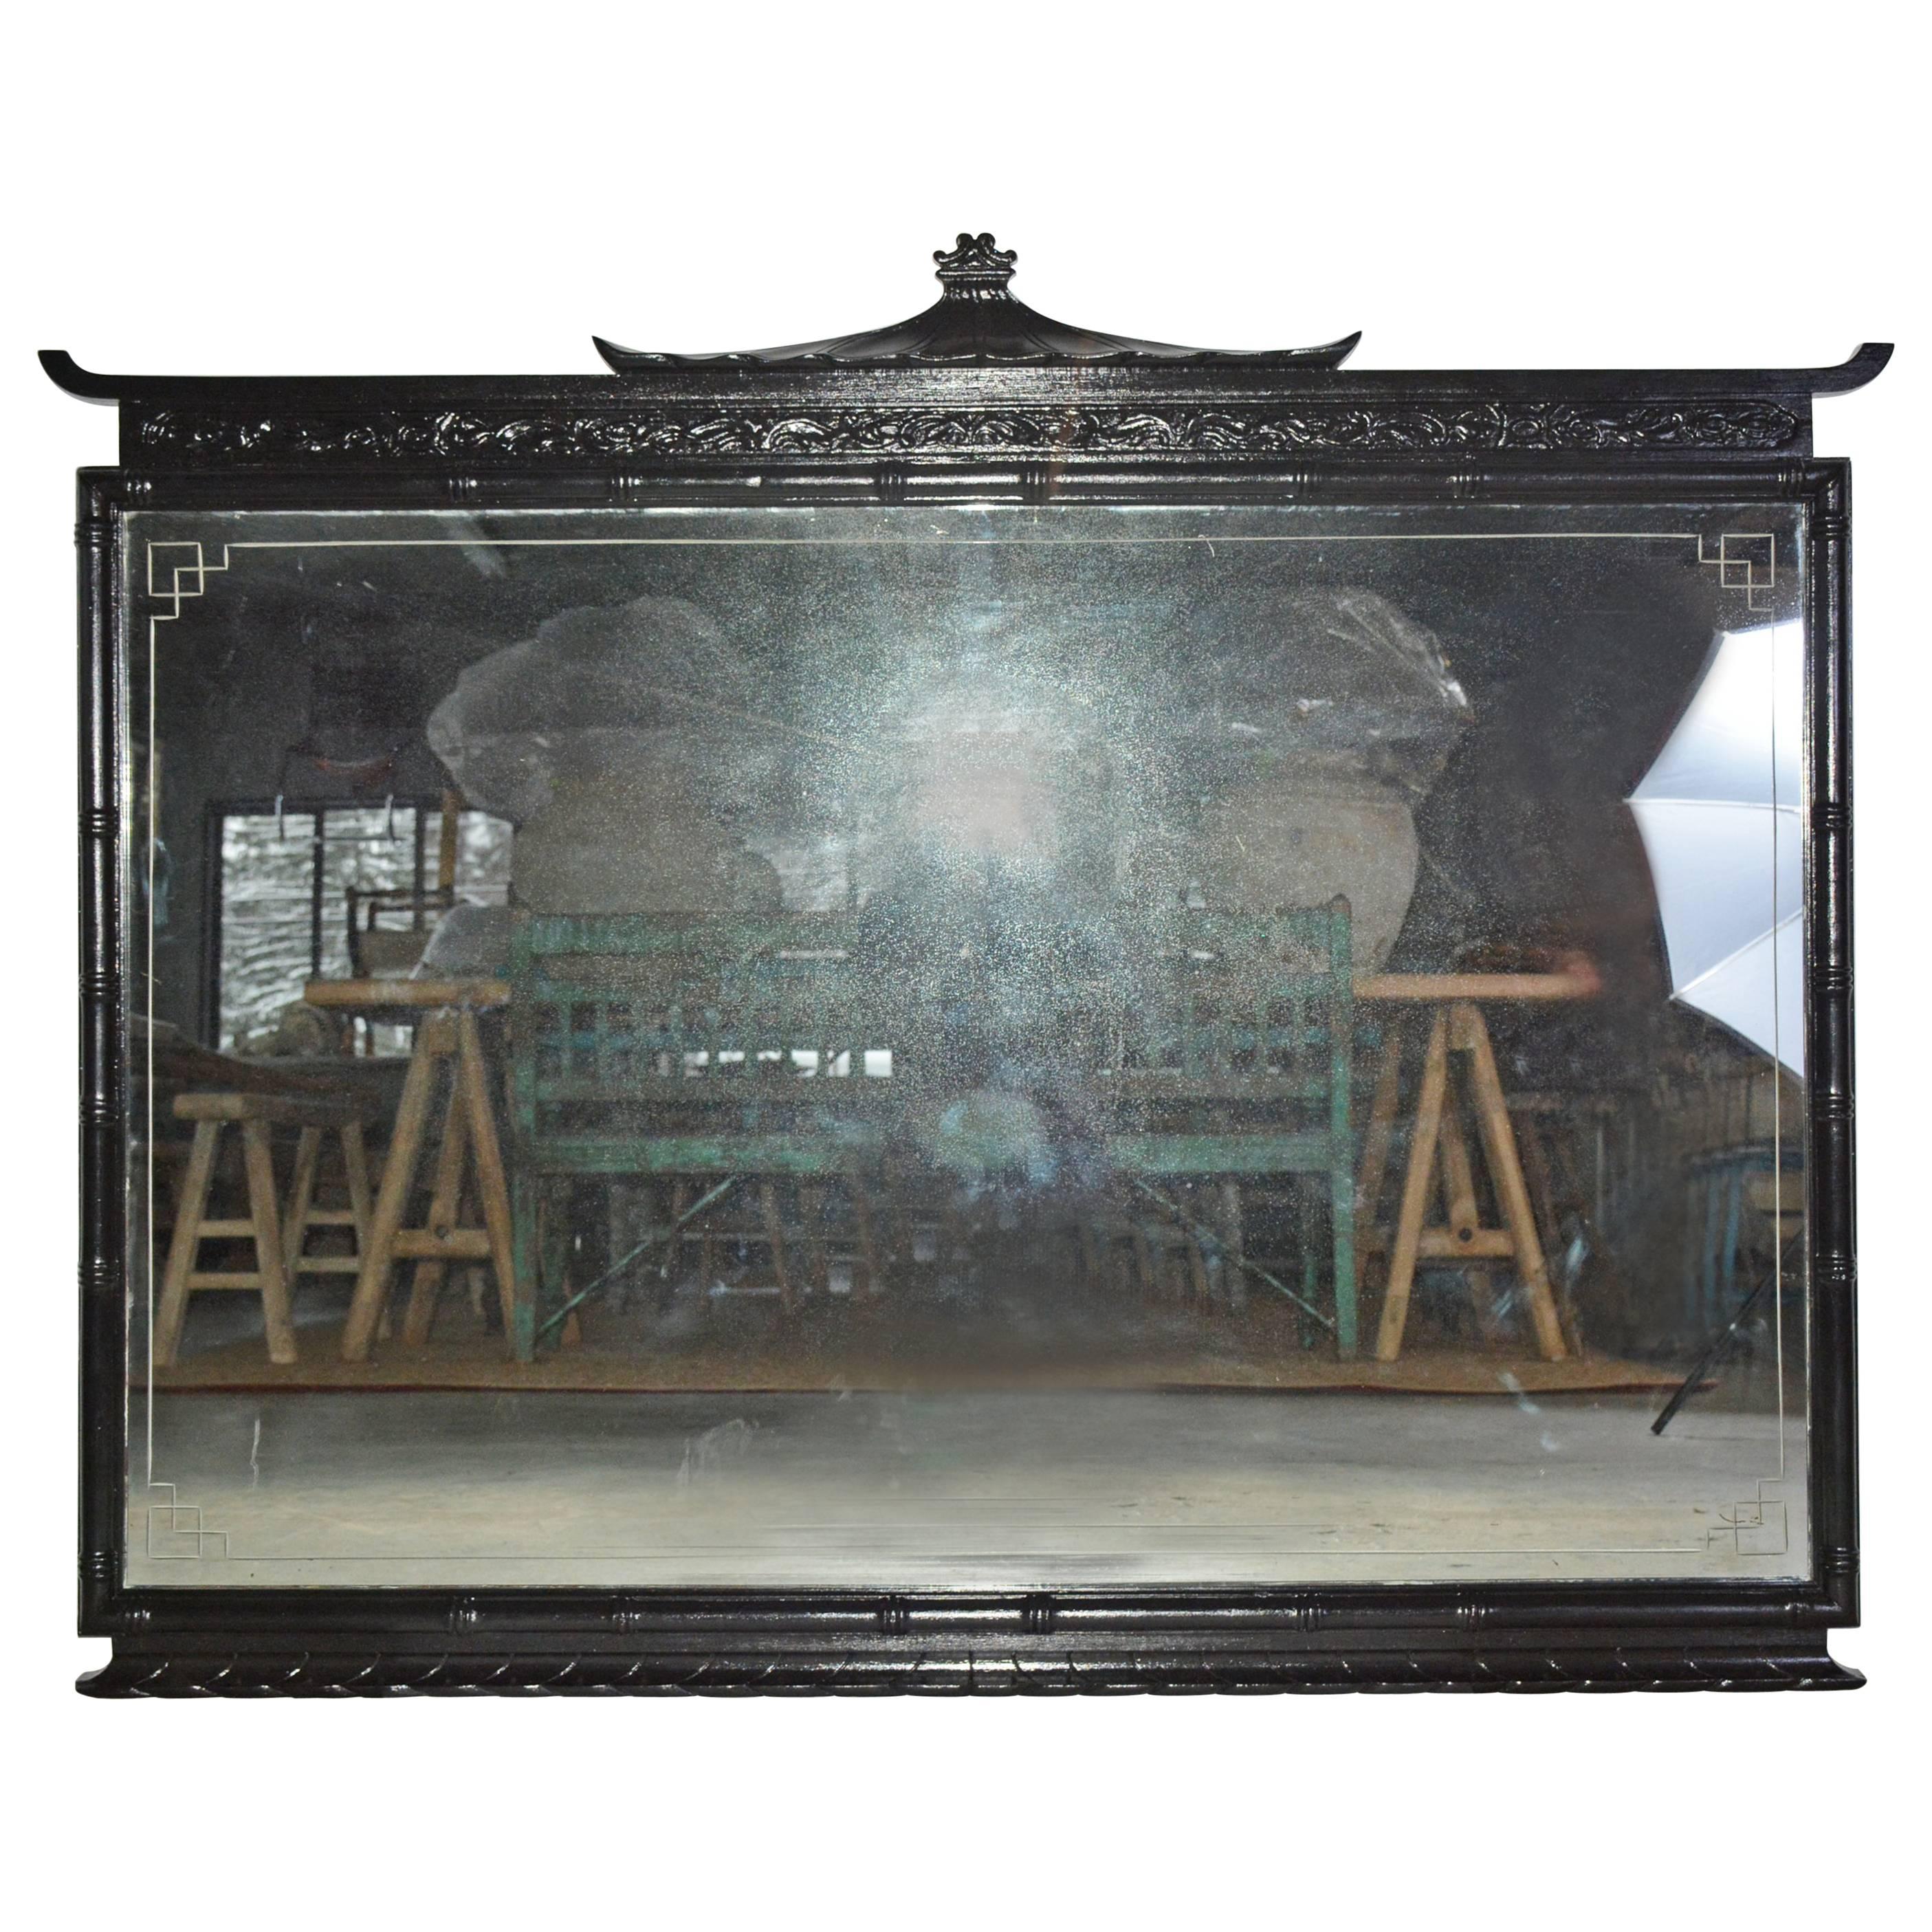 Pagoda chinoiserie style mirror is painted black and has a faux bamboo frame. The mirror has an etched border. Can be used as an over mantel wall mirror or perfect as a dresser mirror.